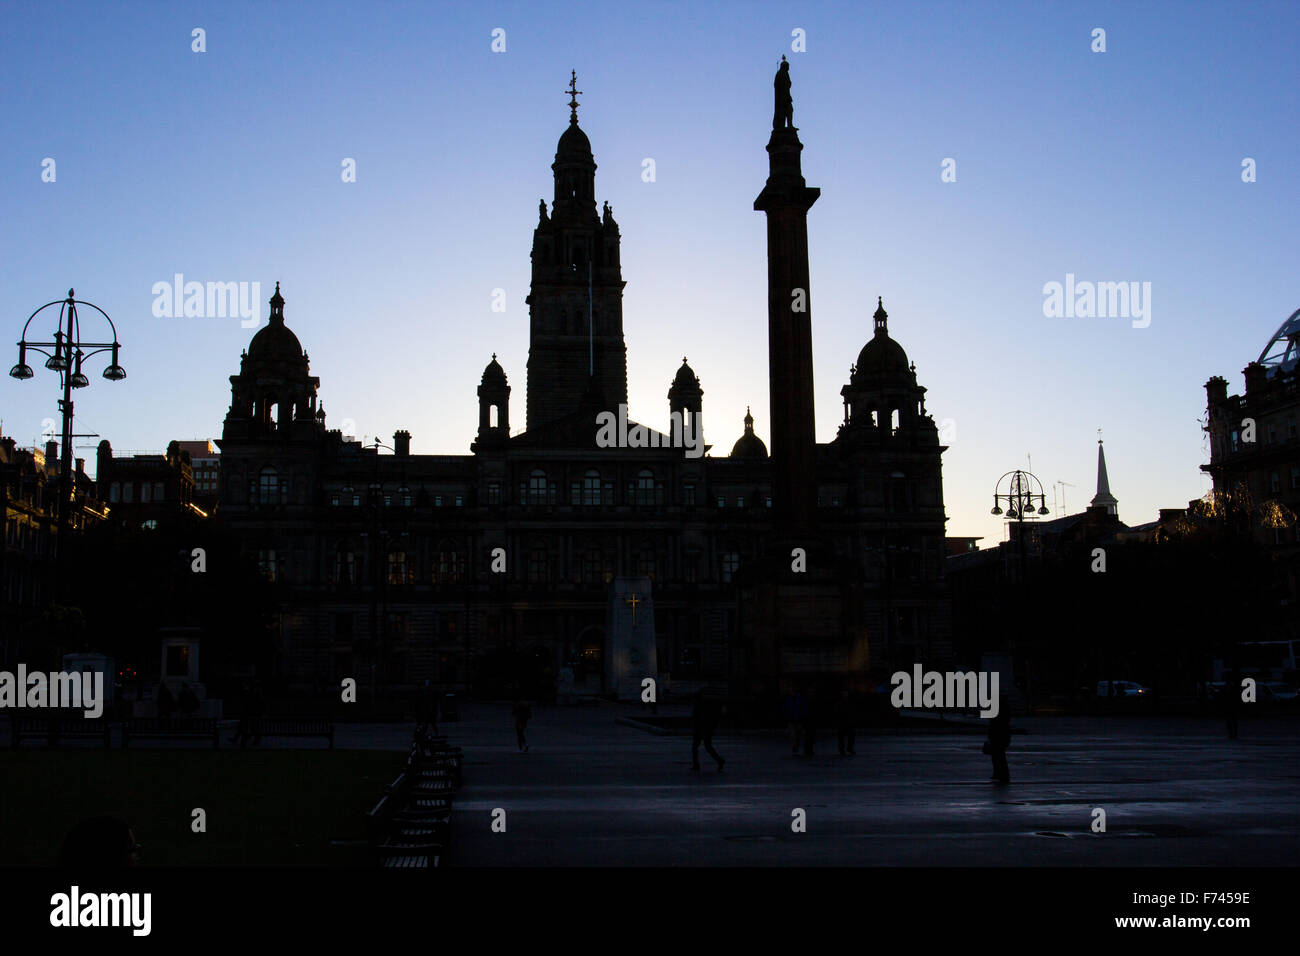 Glasgow city chambers silhouette Banque D'Images